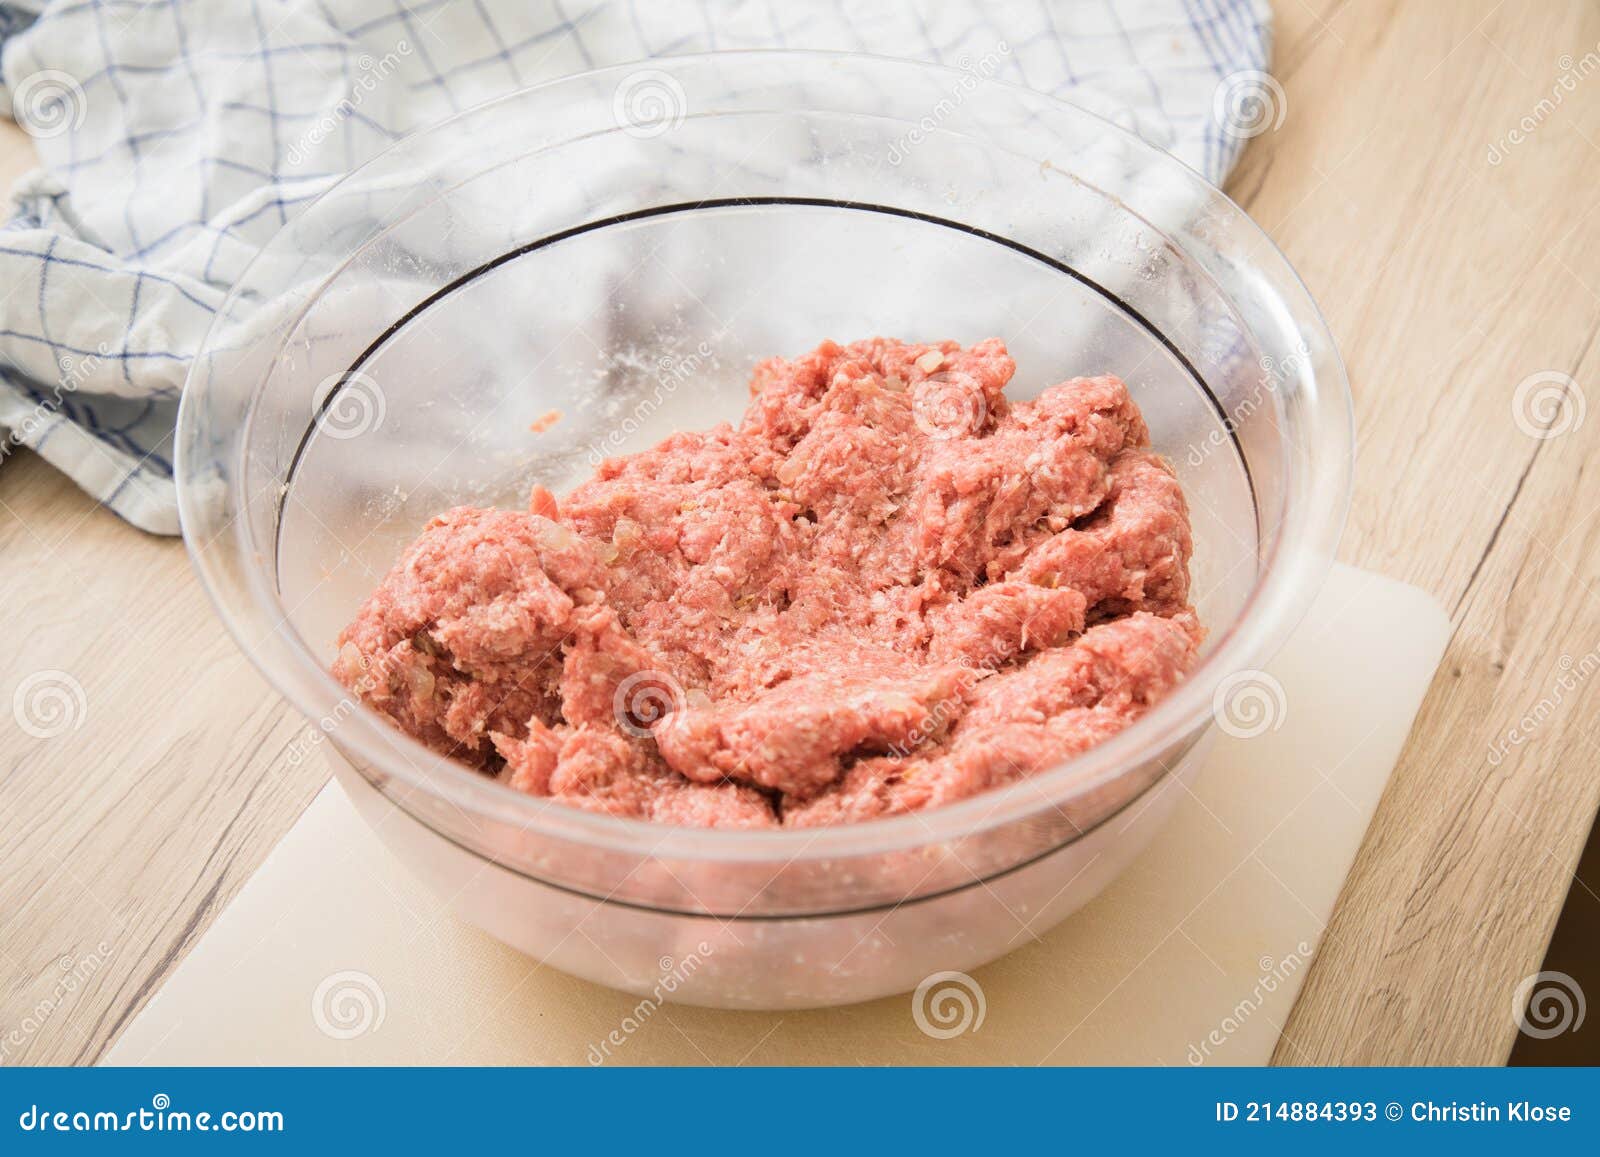 Mixed Minced Meat of Pork and Beef with Ground Spices in Bowl on Cutting Board for Cooking in Domestic Kitchen Image - of board, hygienic: 214884393